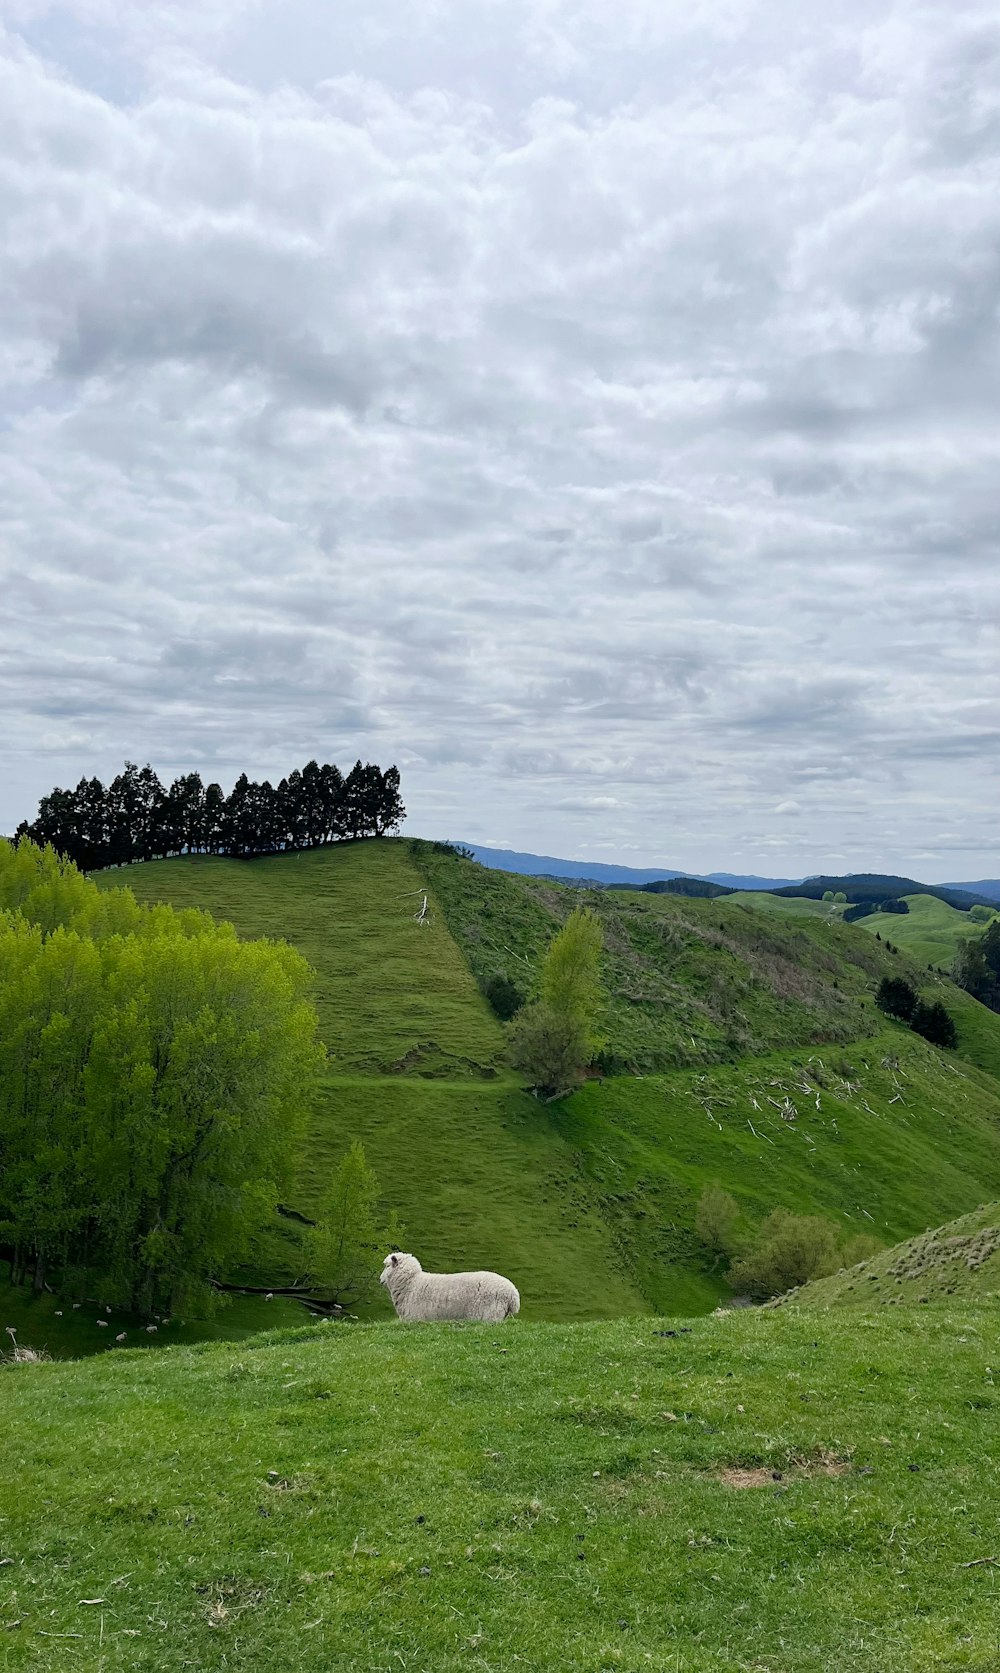 a white sheep standing on top of a lush green hillside